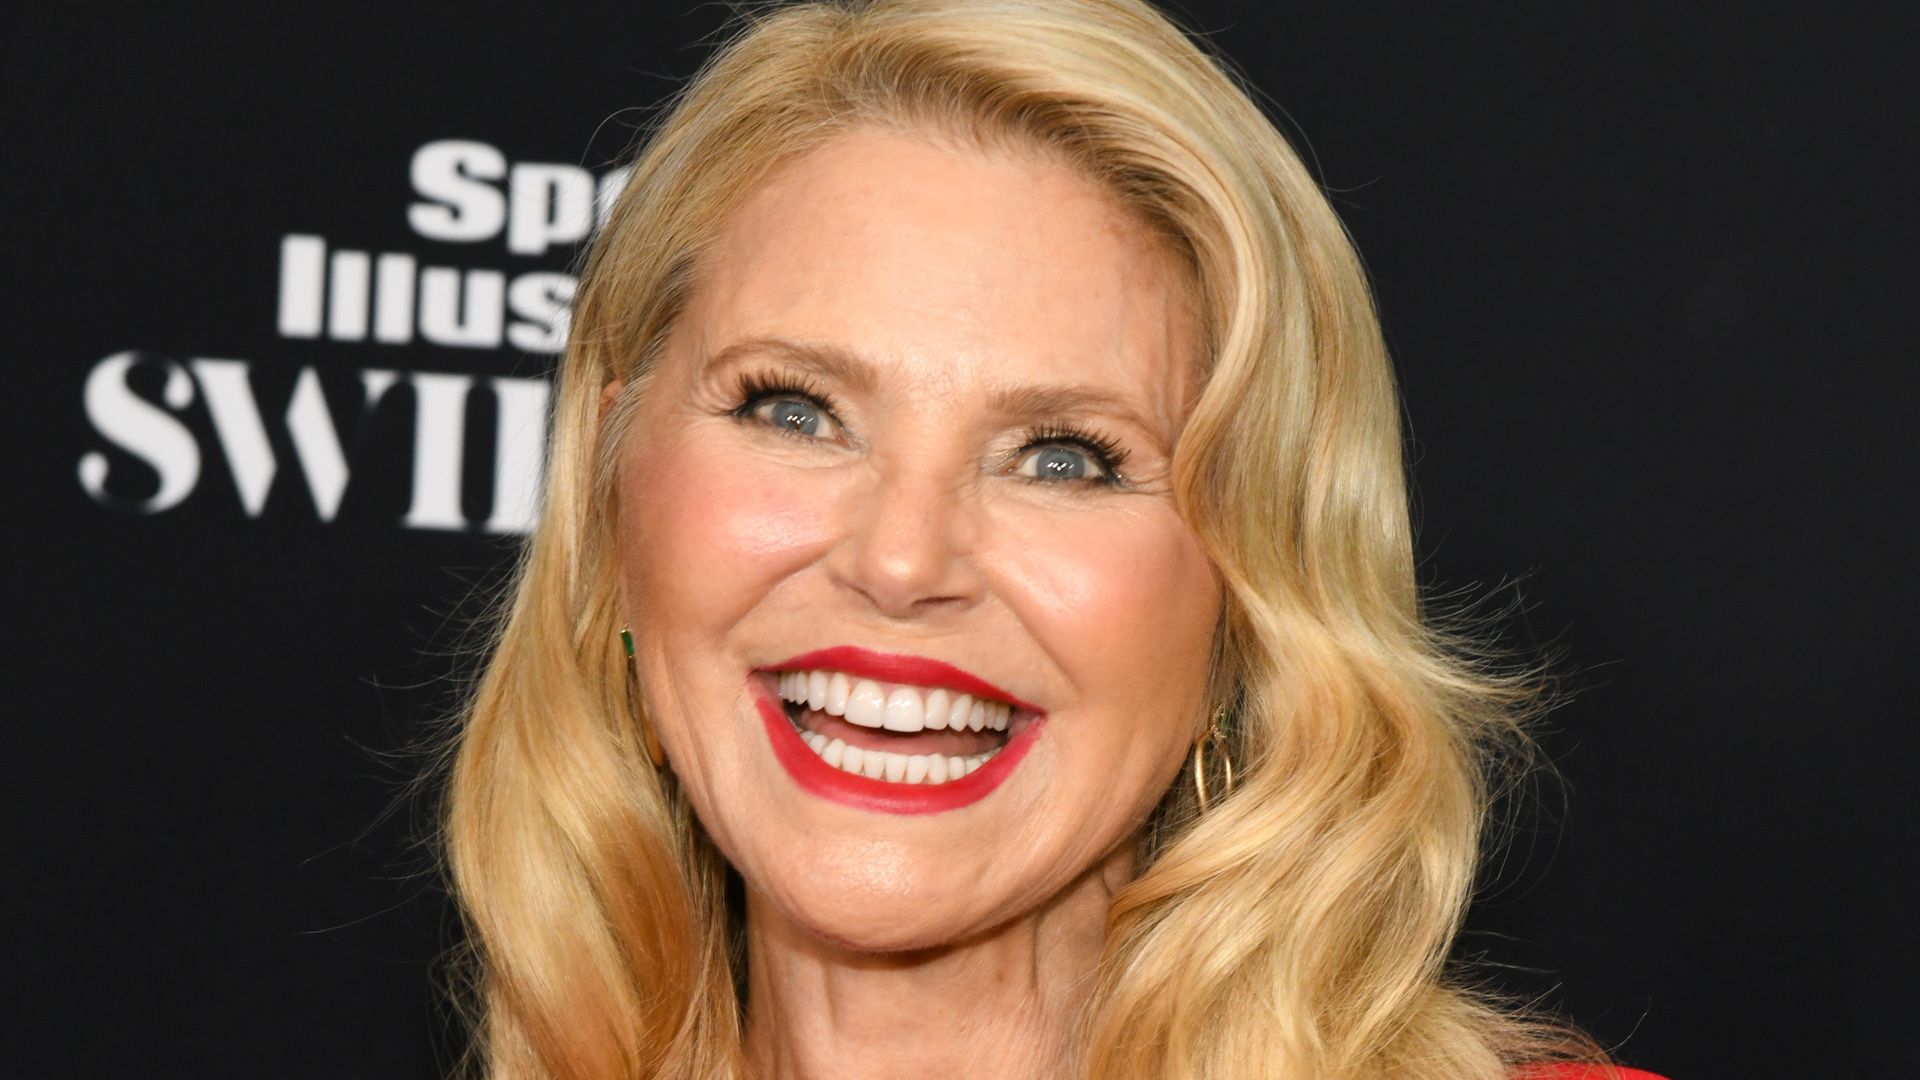 Christie Brinkley, 70, steals the show in a leggy red dress at the Sports Illustrated Swimsuit 60th Anniversary Celebration